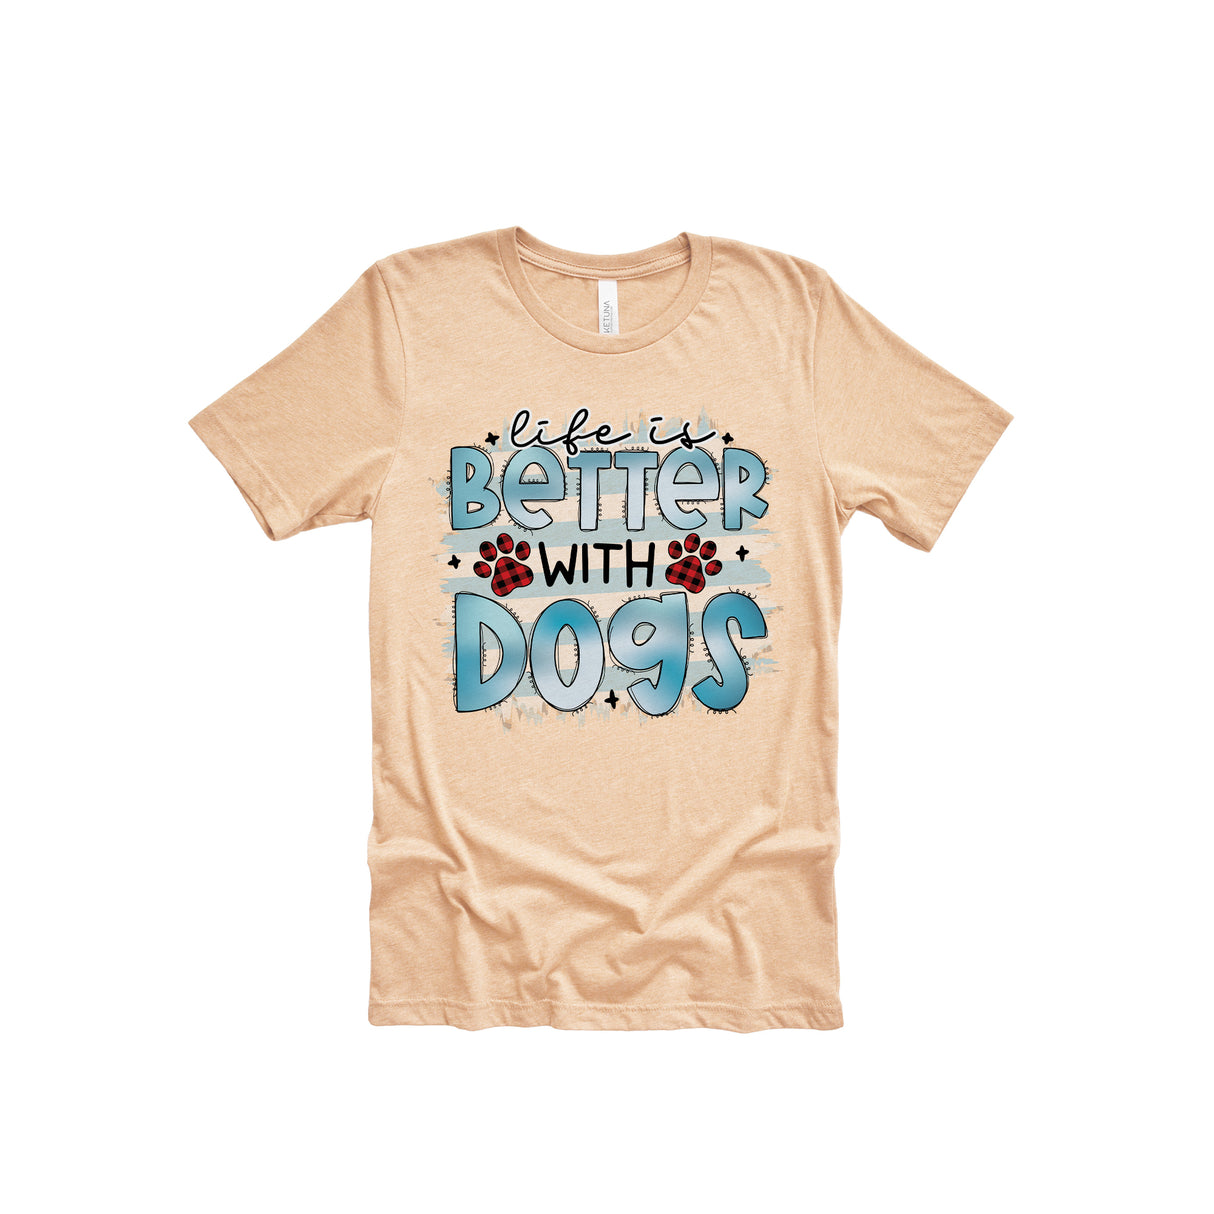 Life Is Better With Dogs Adult T-Shirt